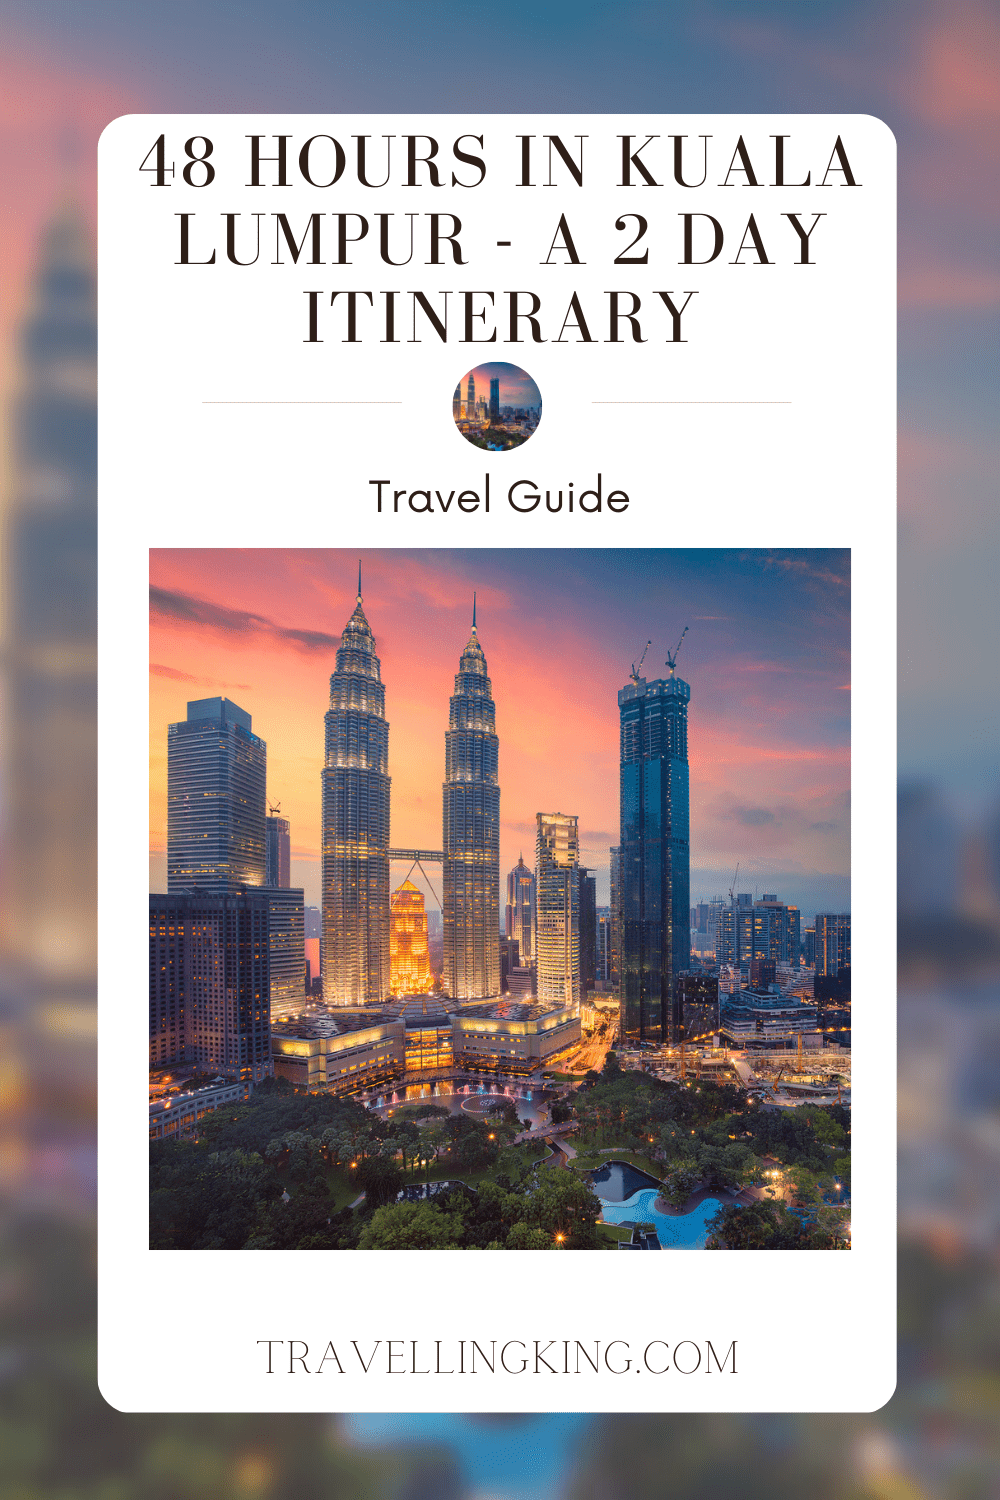 48 hours in Kuala Lumpur - A 2 day Itinerary